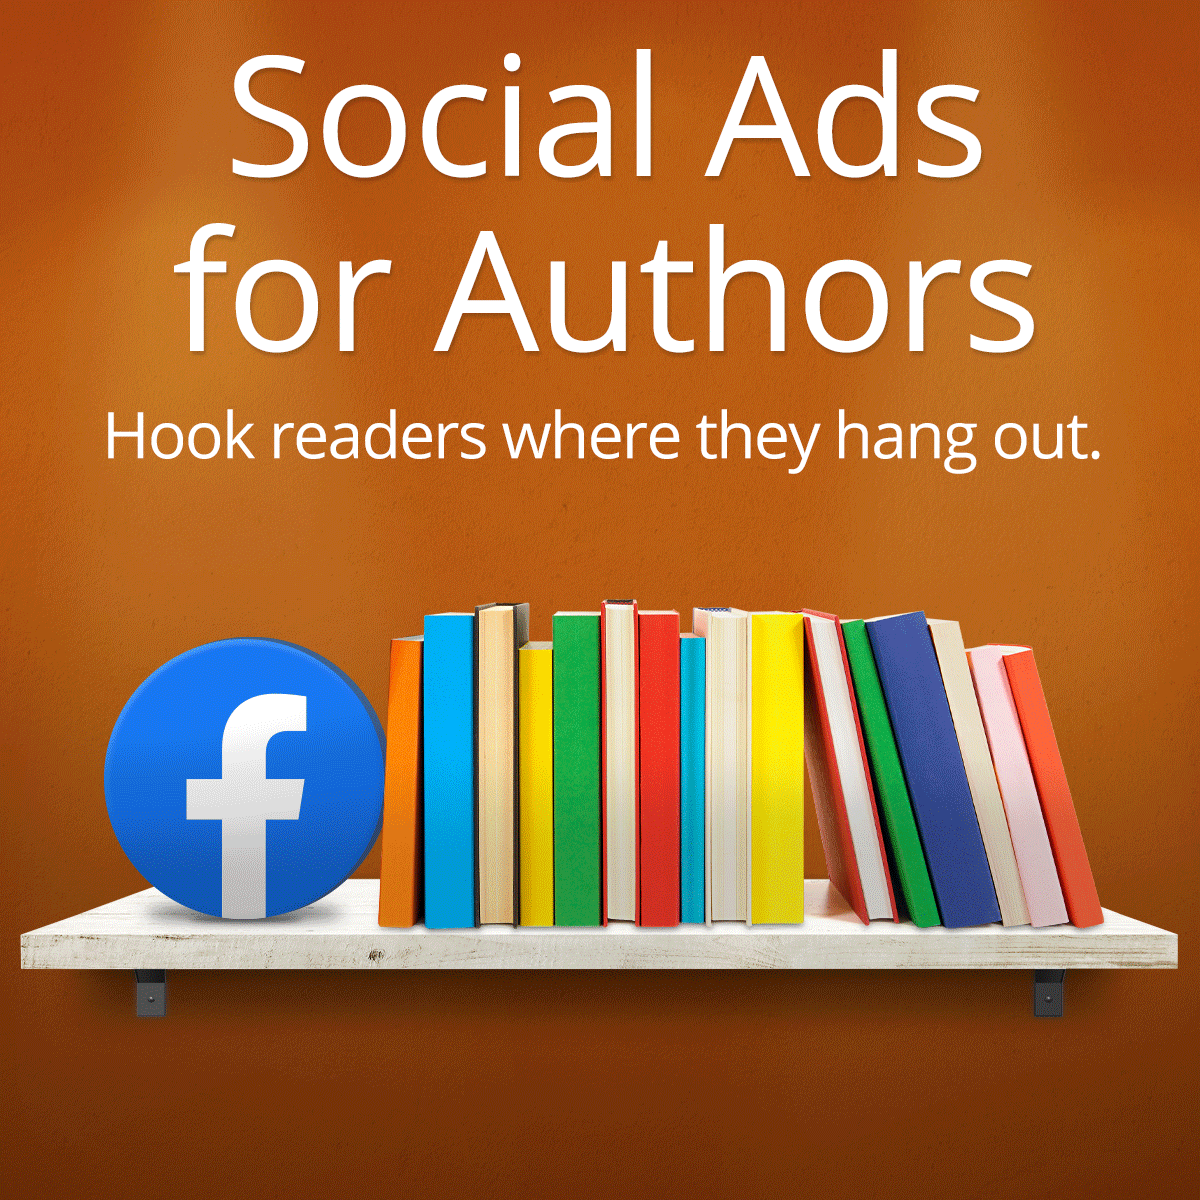 Social Ads for Authors